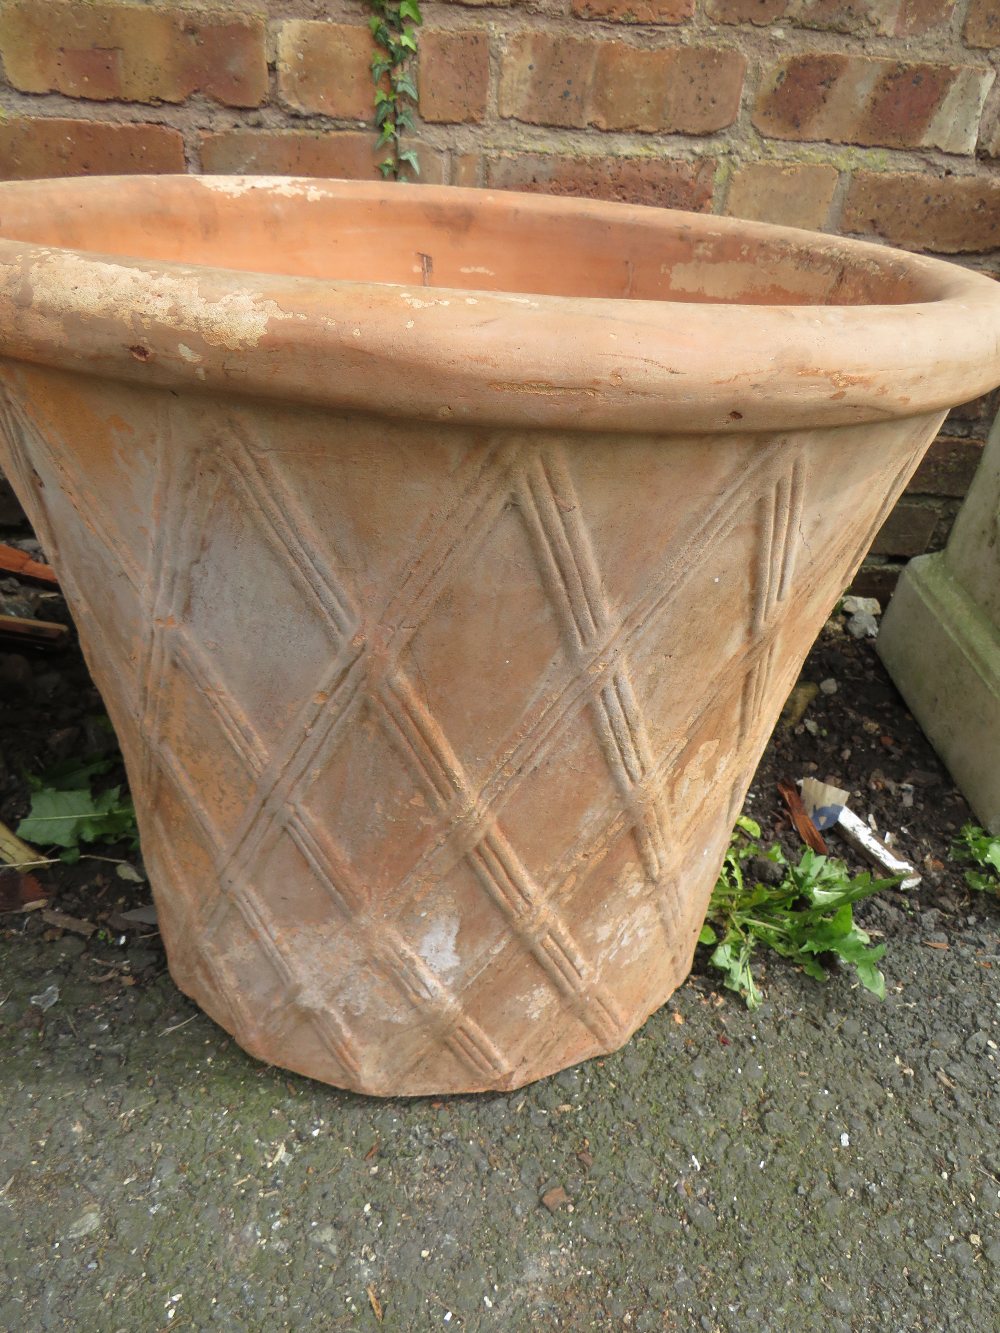 A PAIR OF EXTRA LARGE TERRACOTTA GARDEN PLANTERS - Image 2 of 8